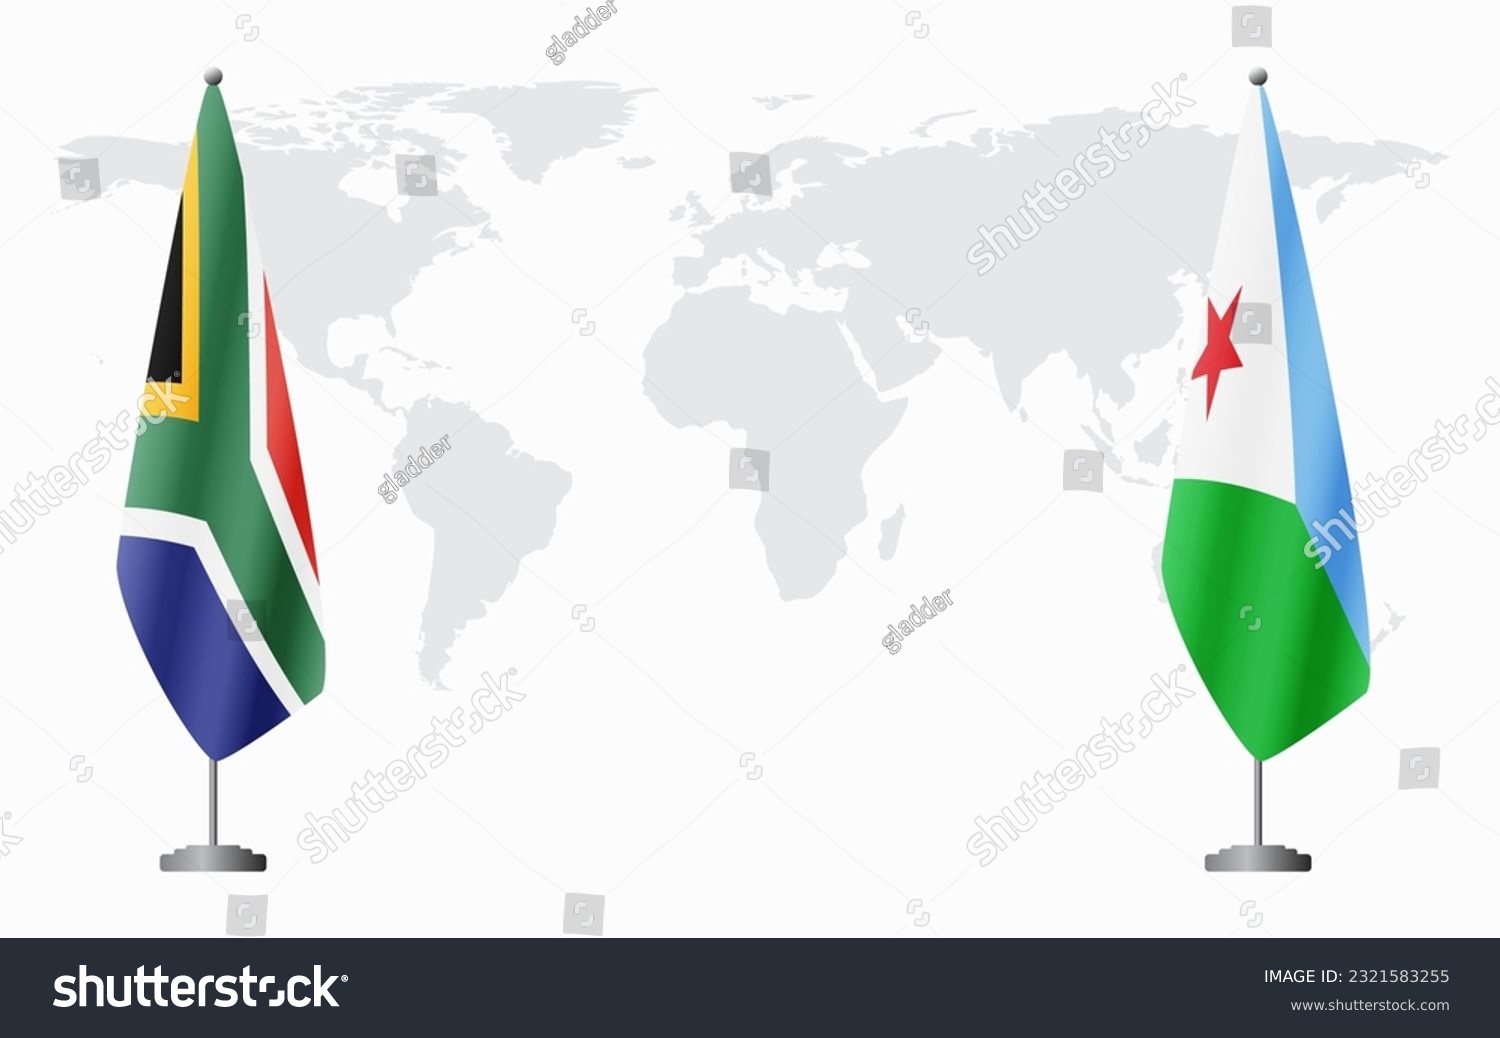 SVG of South Africa and Djibouti flags for official meeting against background of world map. svg